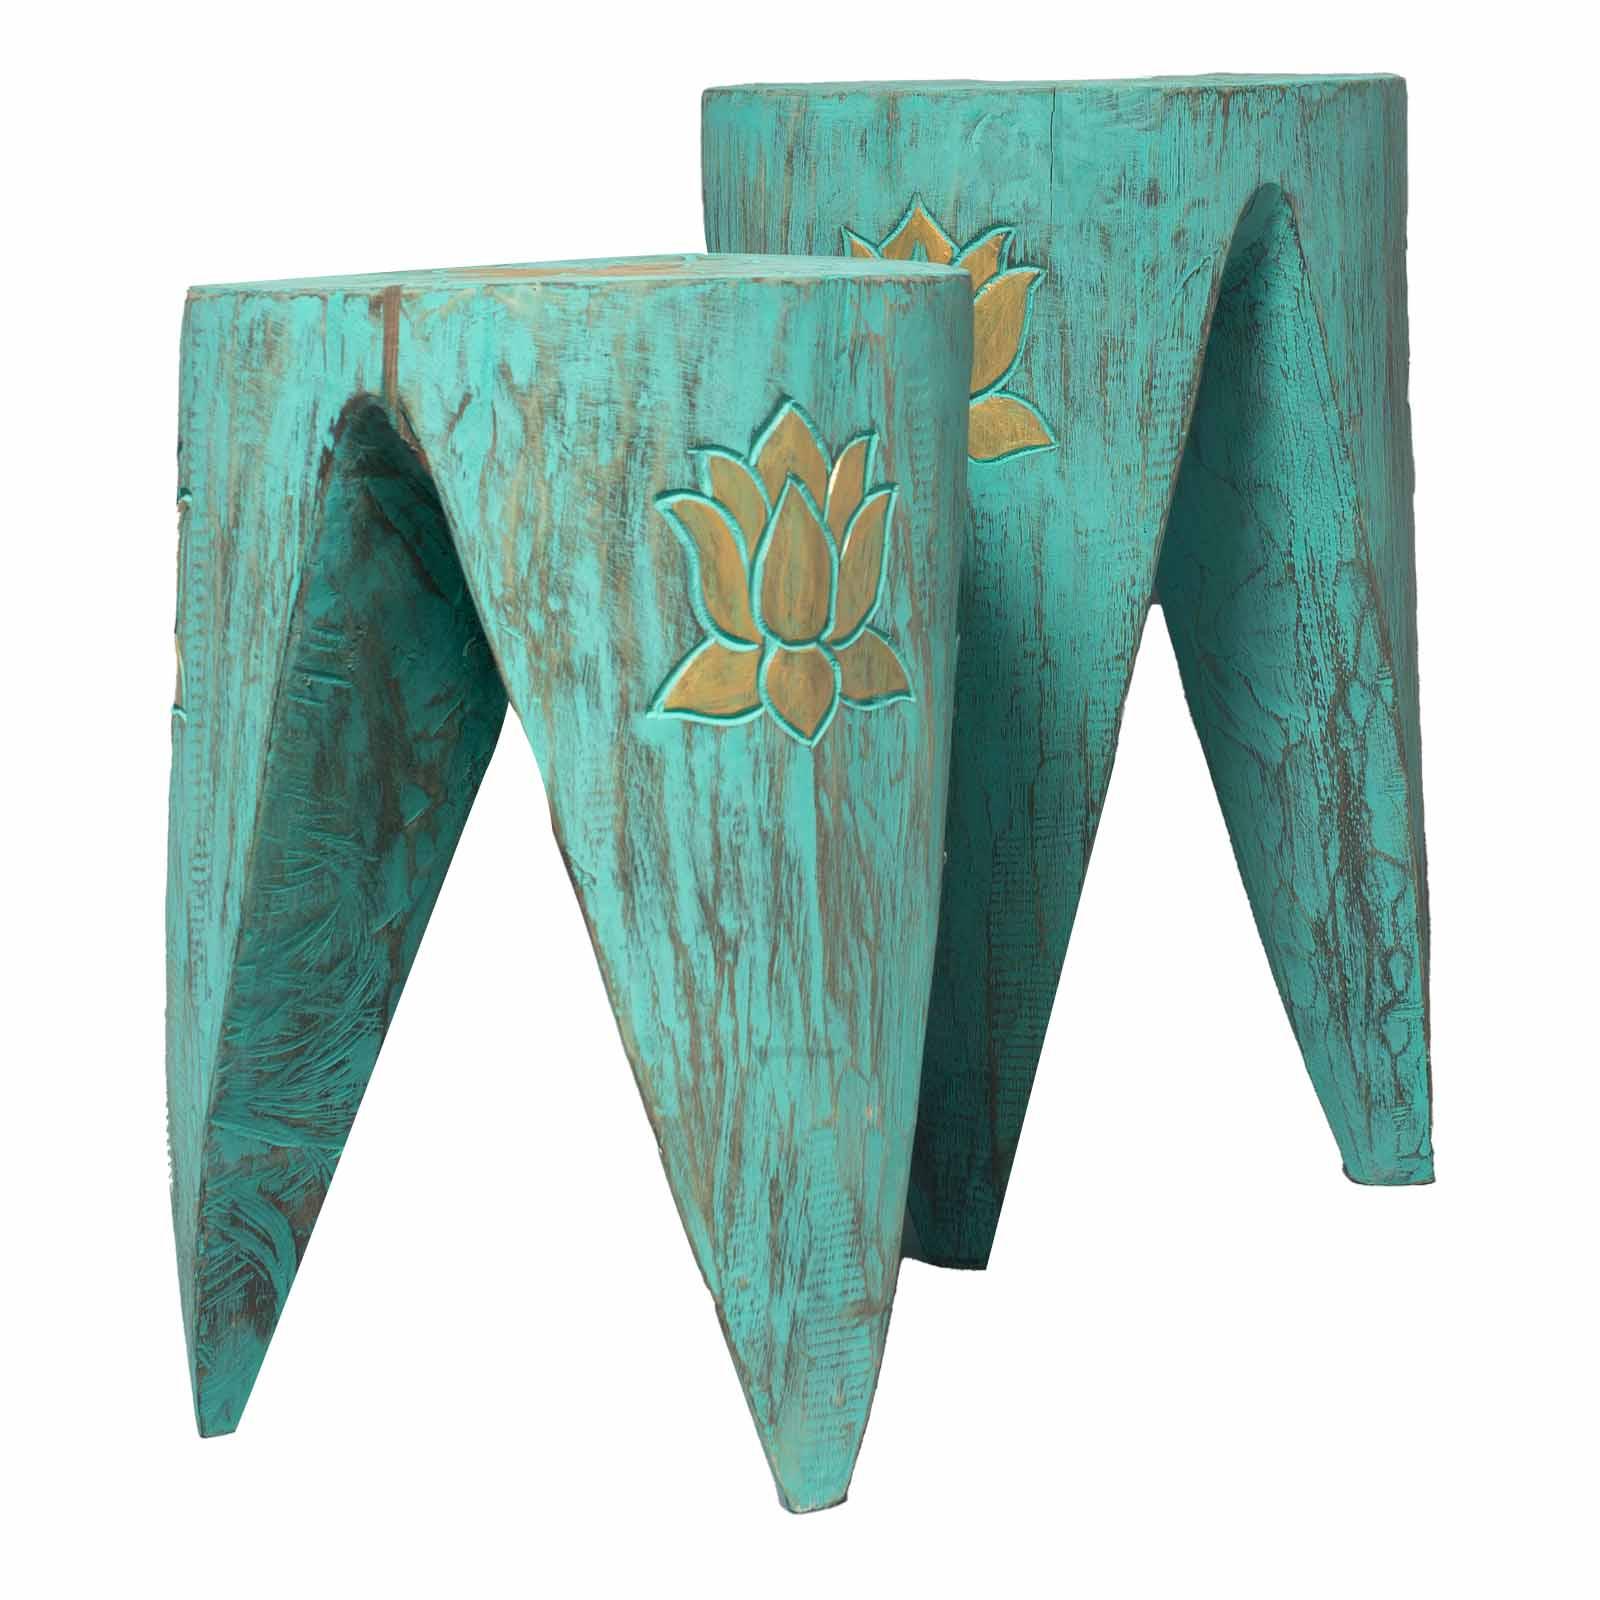 Tribal Tables / Stools - Charming Spaces